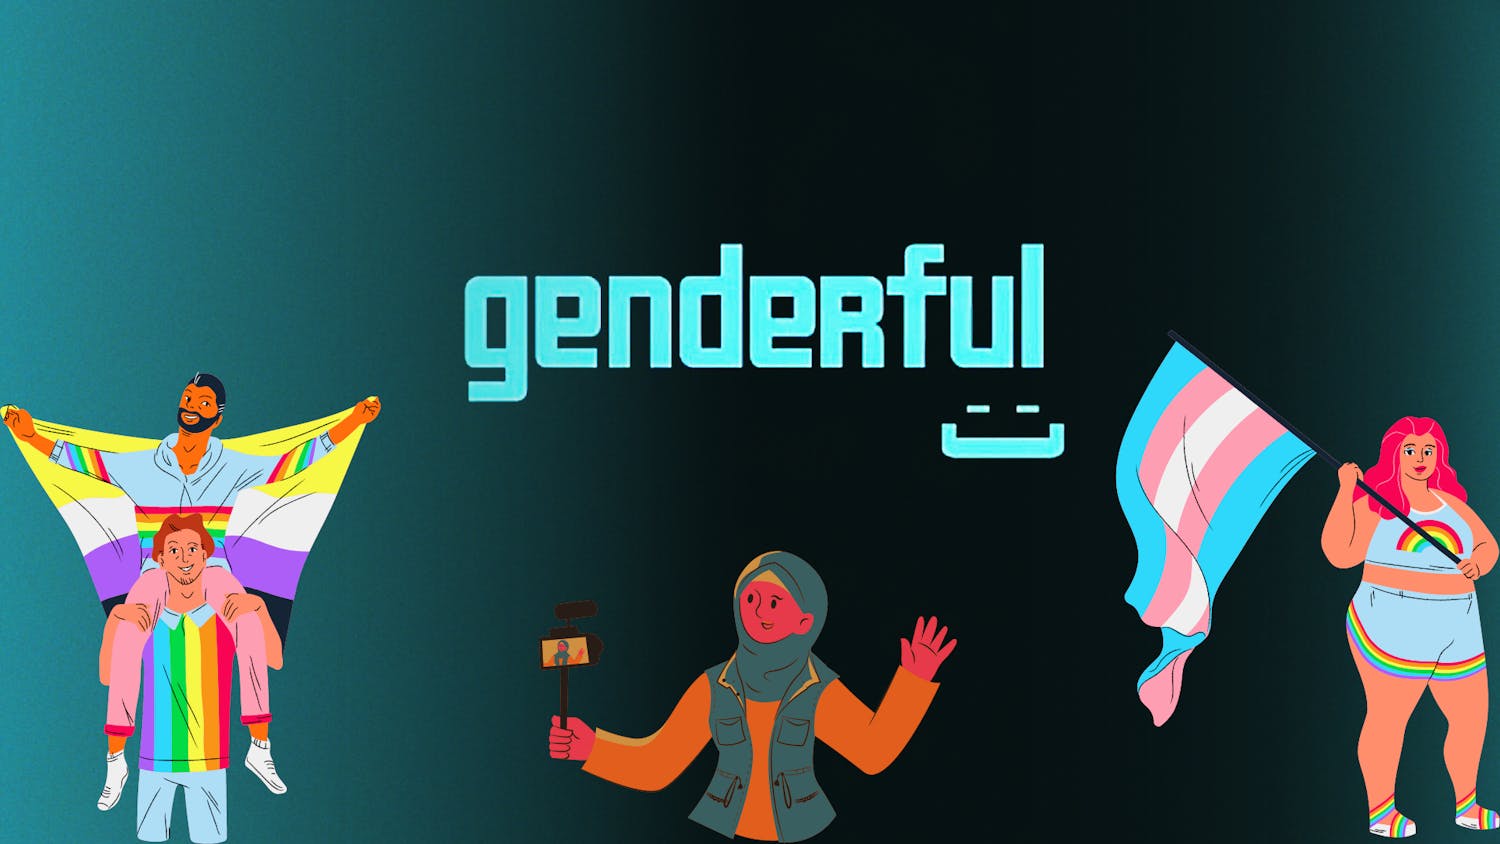 Genderful Toolkit, an online video series for gender-nonconforming individuals to share their personal stories about their identities, intends to increase representation for the gender-nonconforming community as well as educate the cis-gendered population on the lives of gender-nonconforming people. 